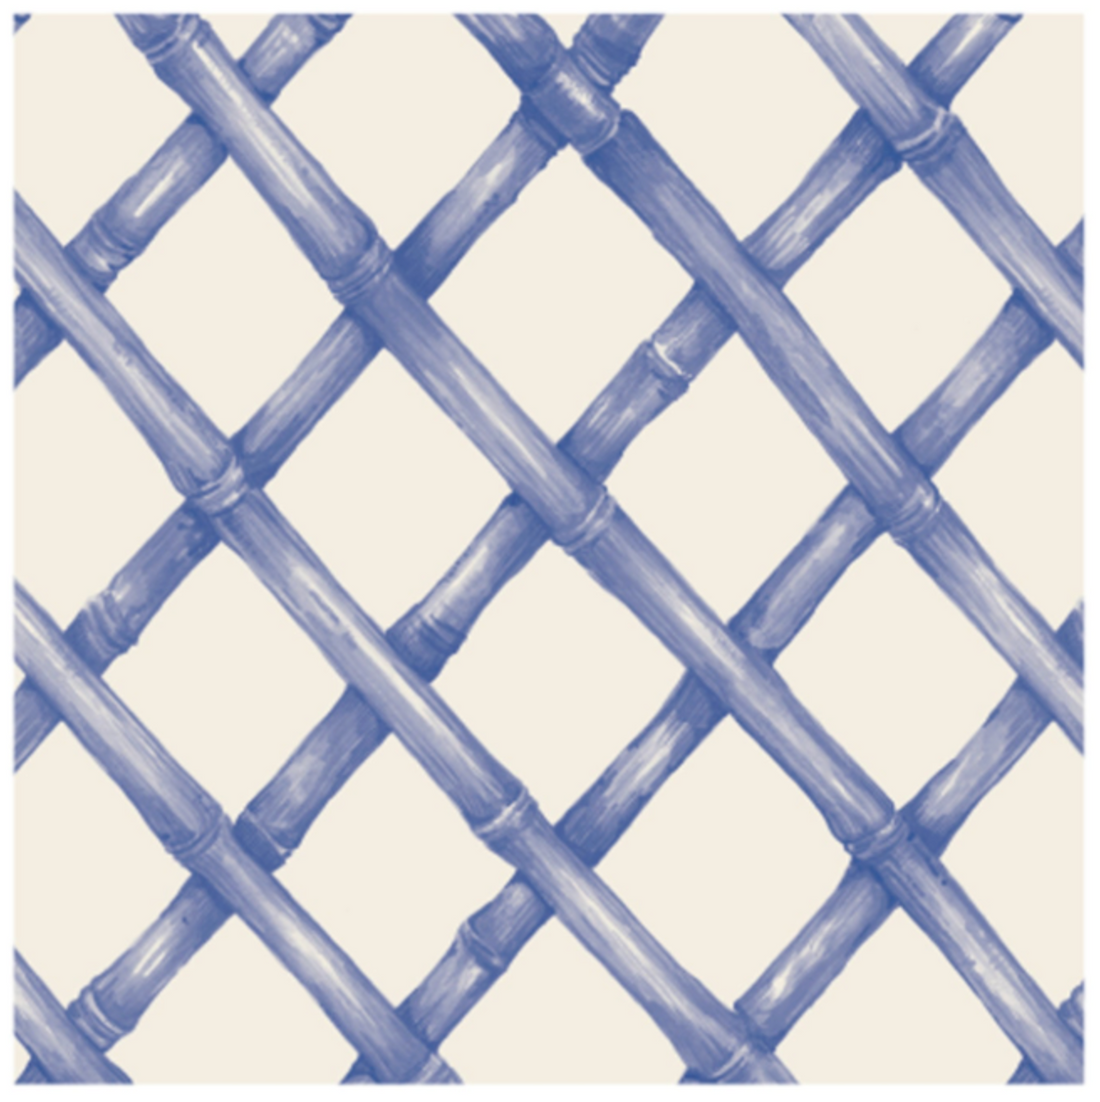 A diagonal woven bamboo pattern in monochrome blue on a white background, on a square cocktail napkin.